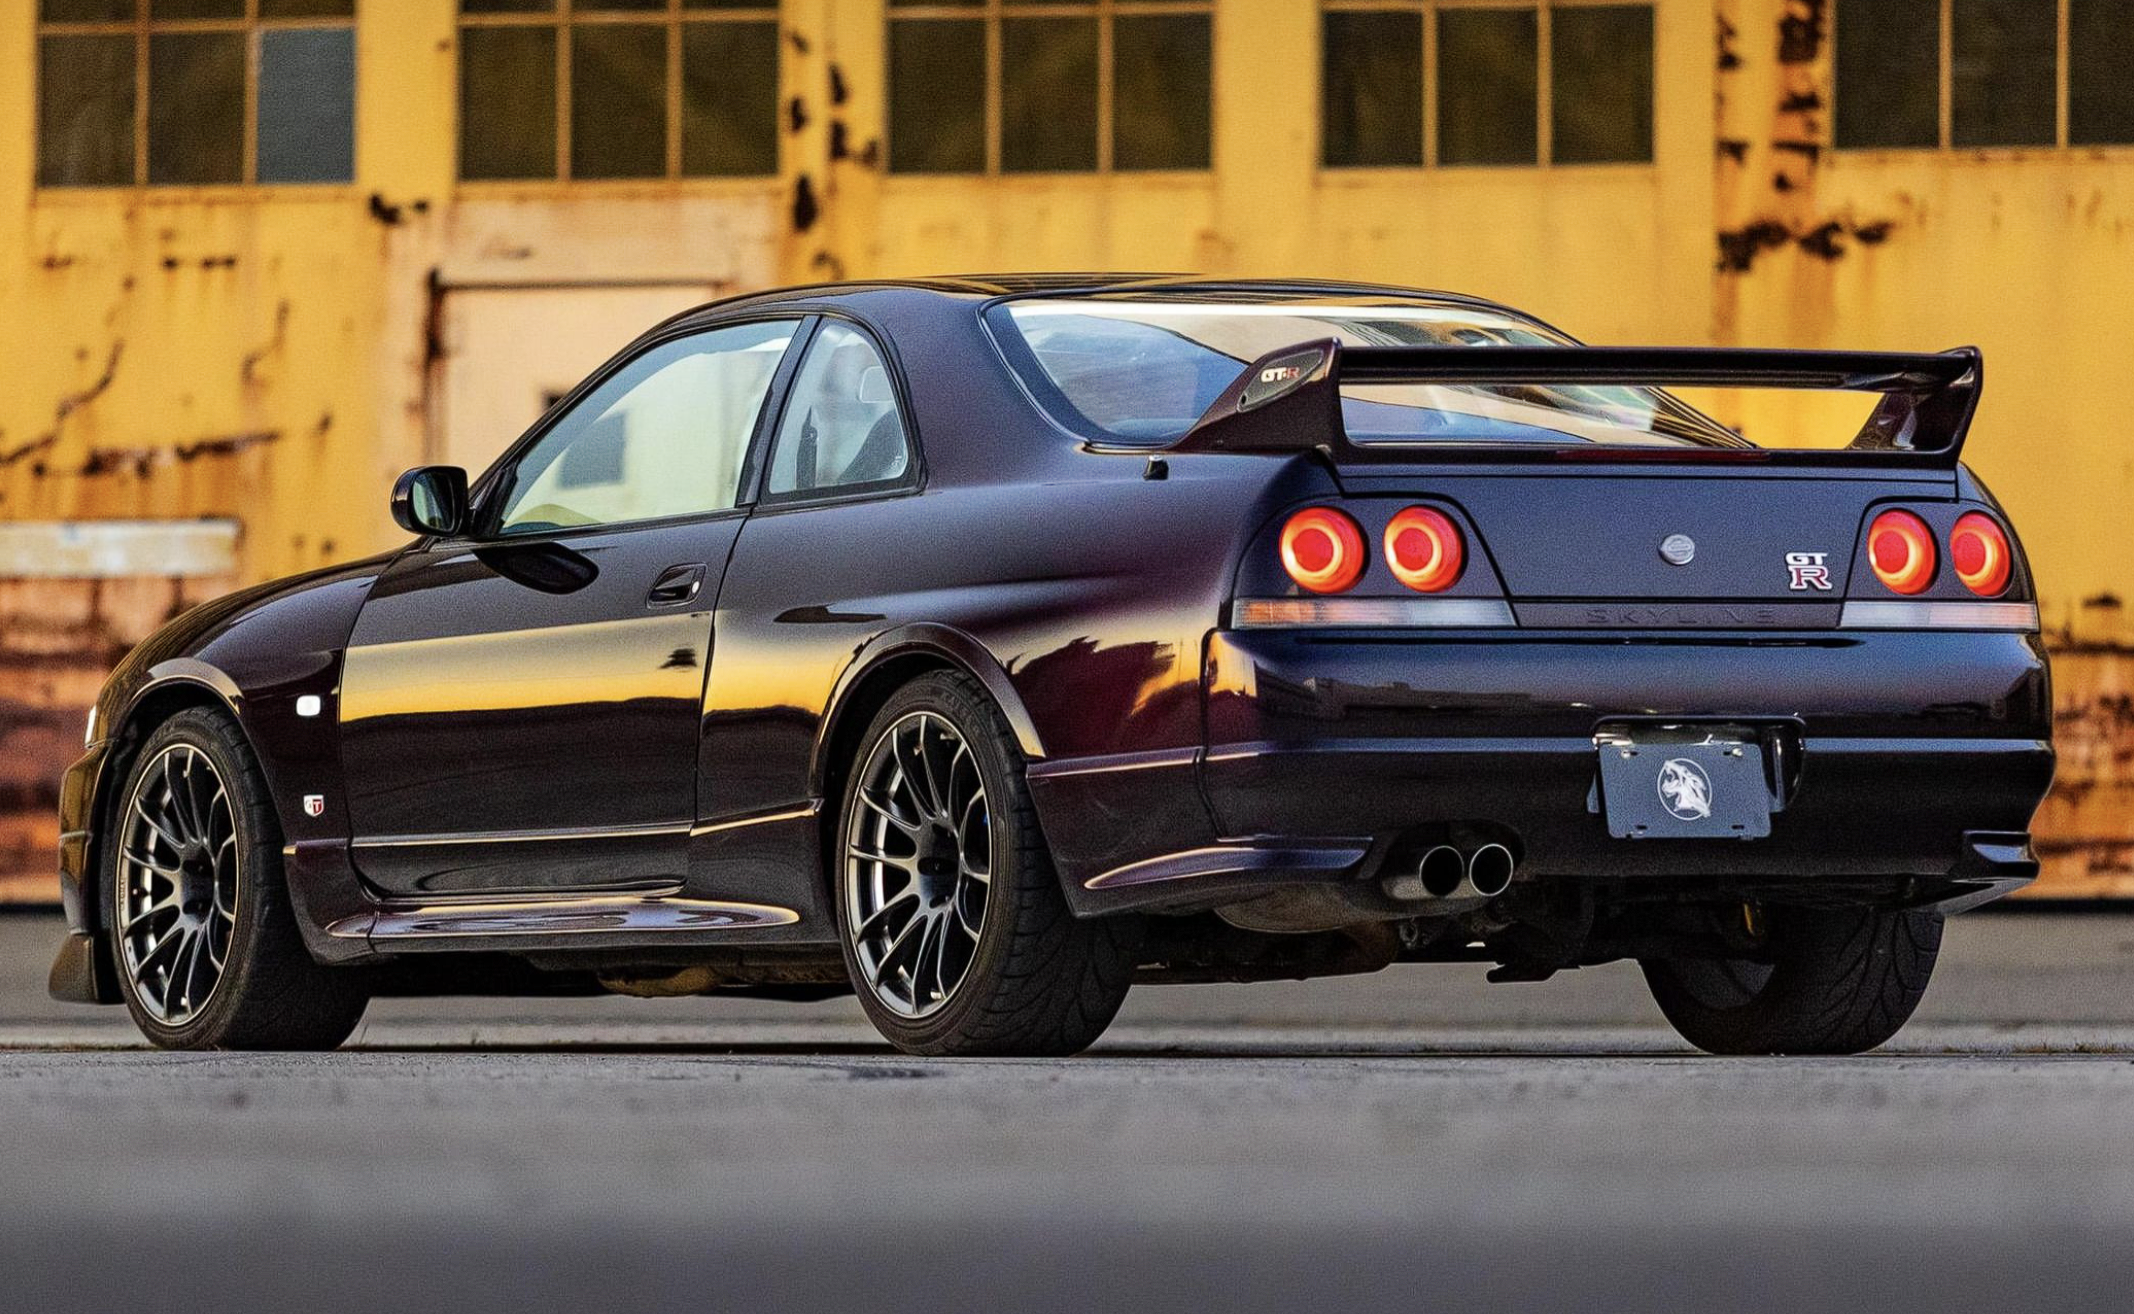 General 2134x1314 Nissan GT-R 1995 Nissan Skyline GT-R Nissan Skyline car rear view taillights vehicle concrete reflection black cars licence plates